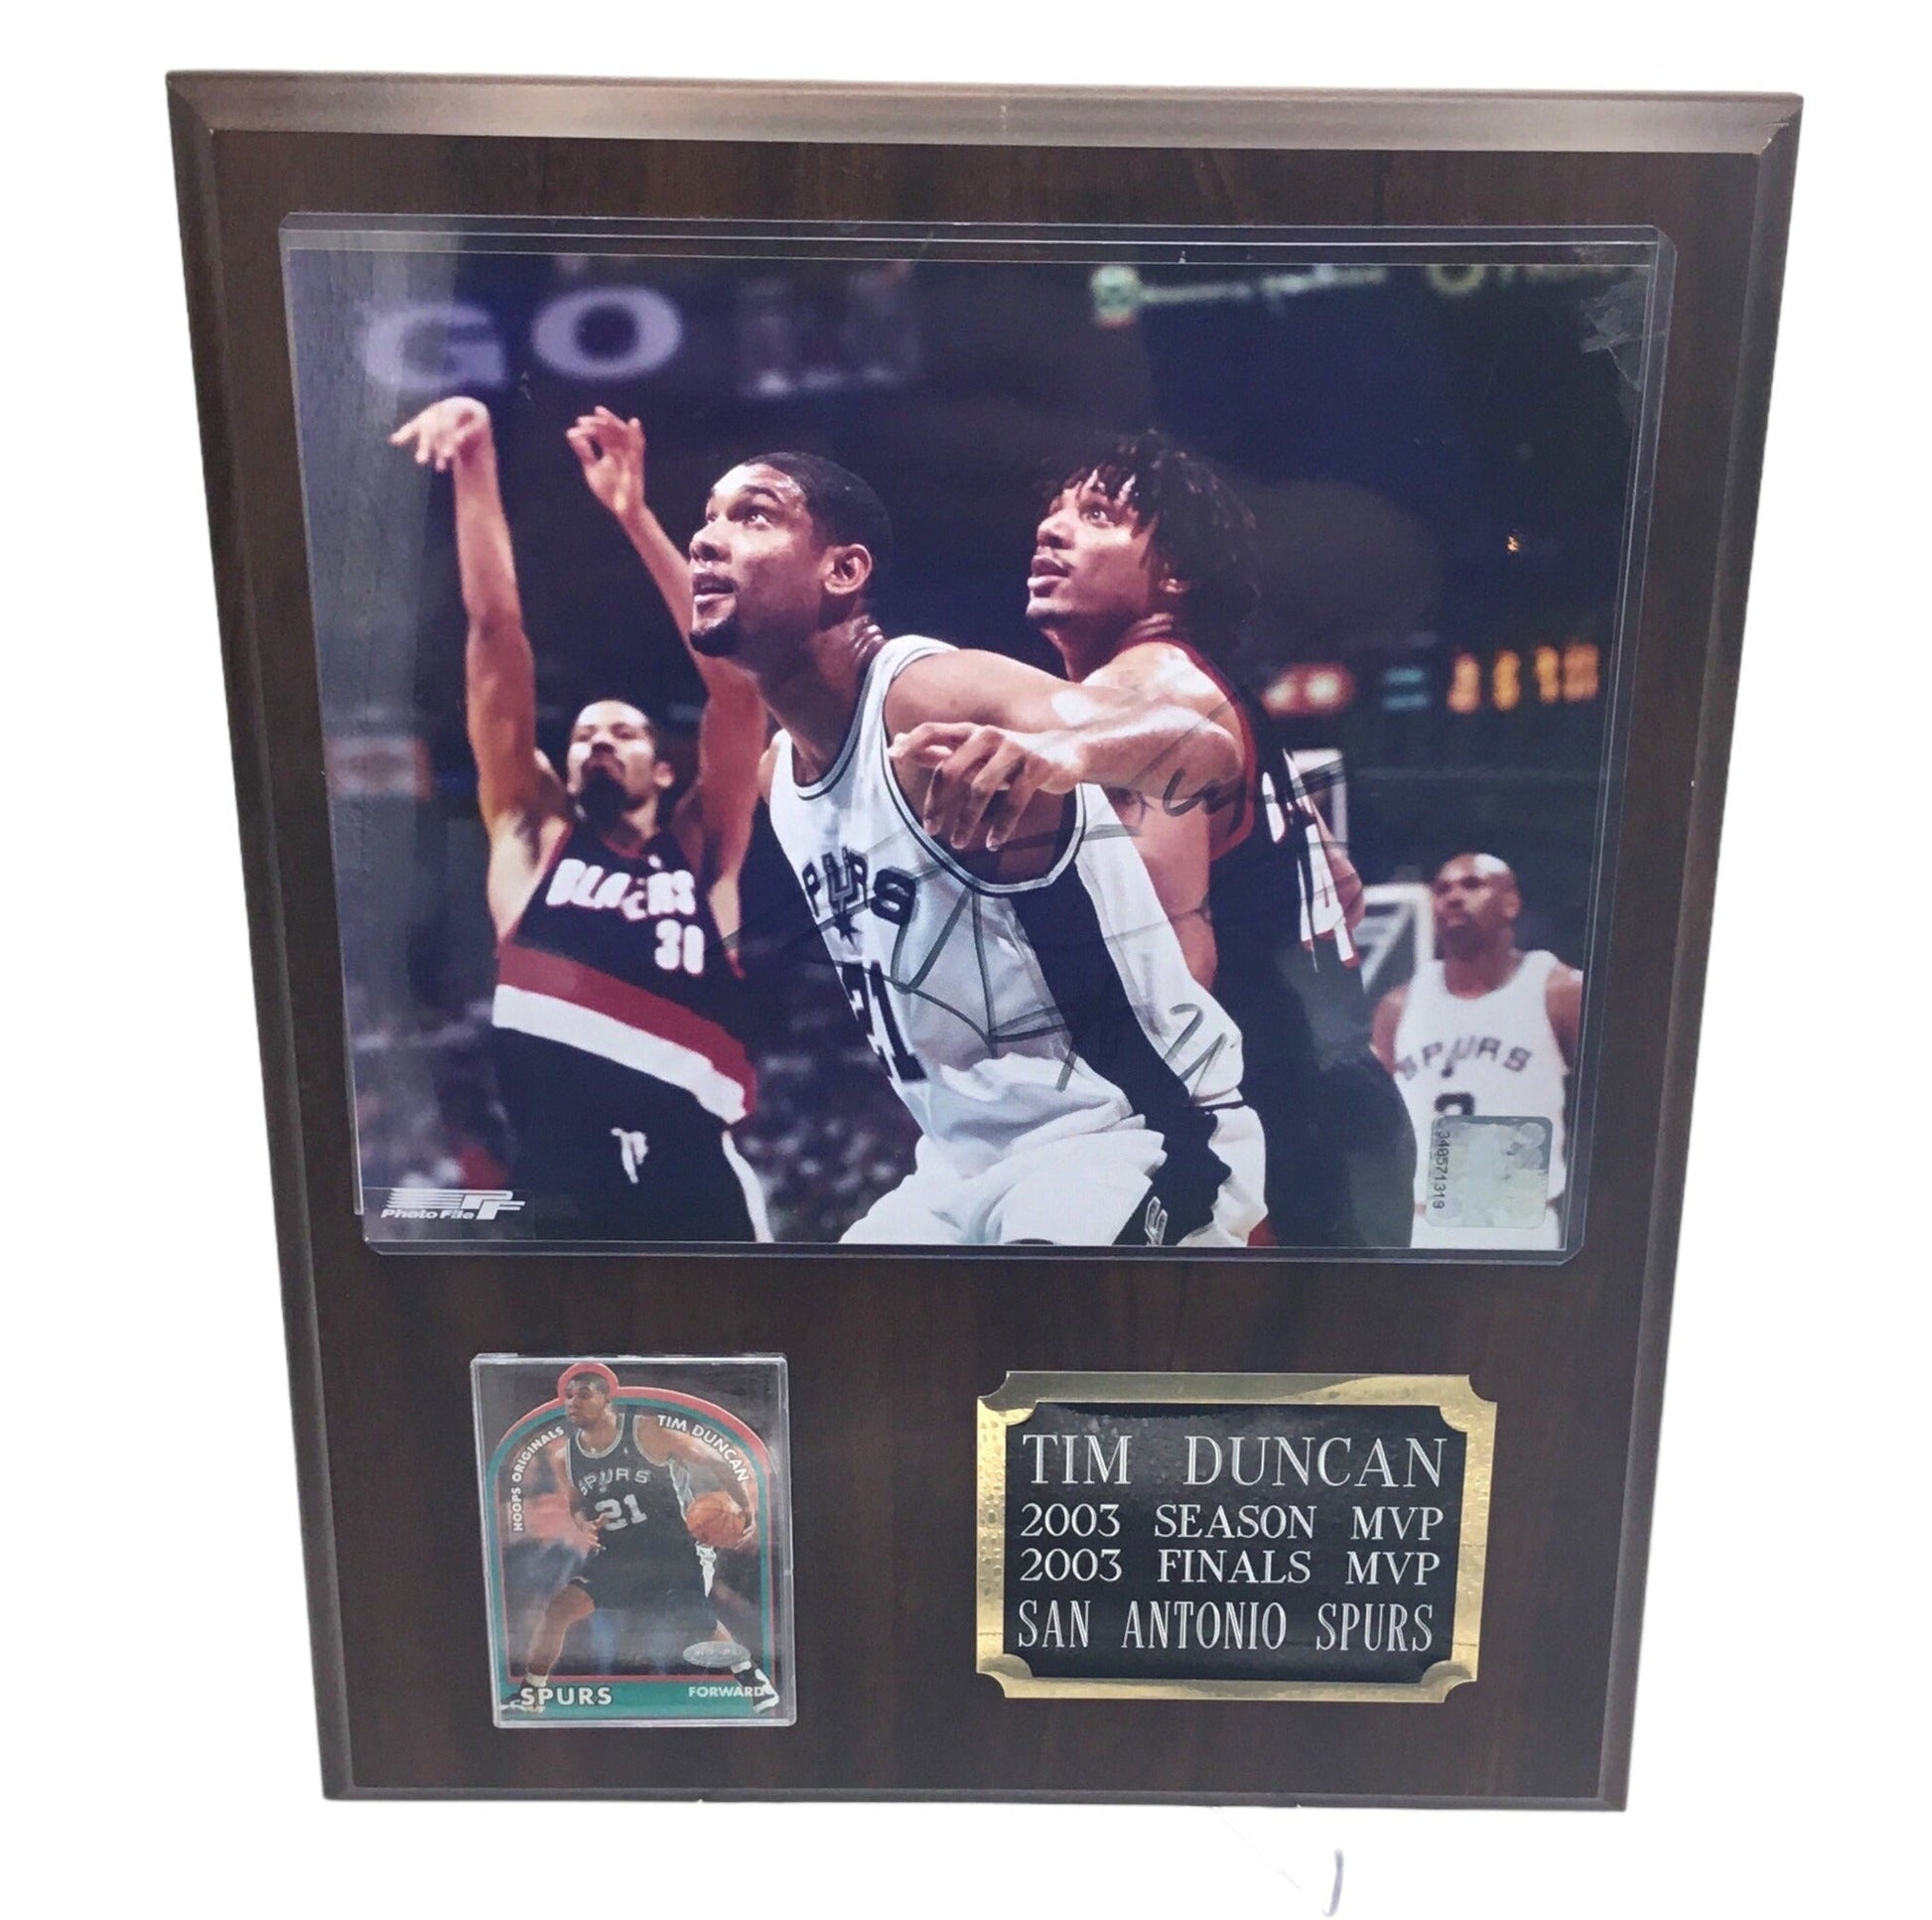 Tim Duncan MVP Autographed 8x10" Photo on Plaque with Sports Card